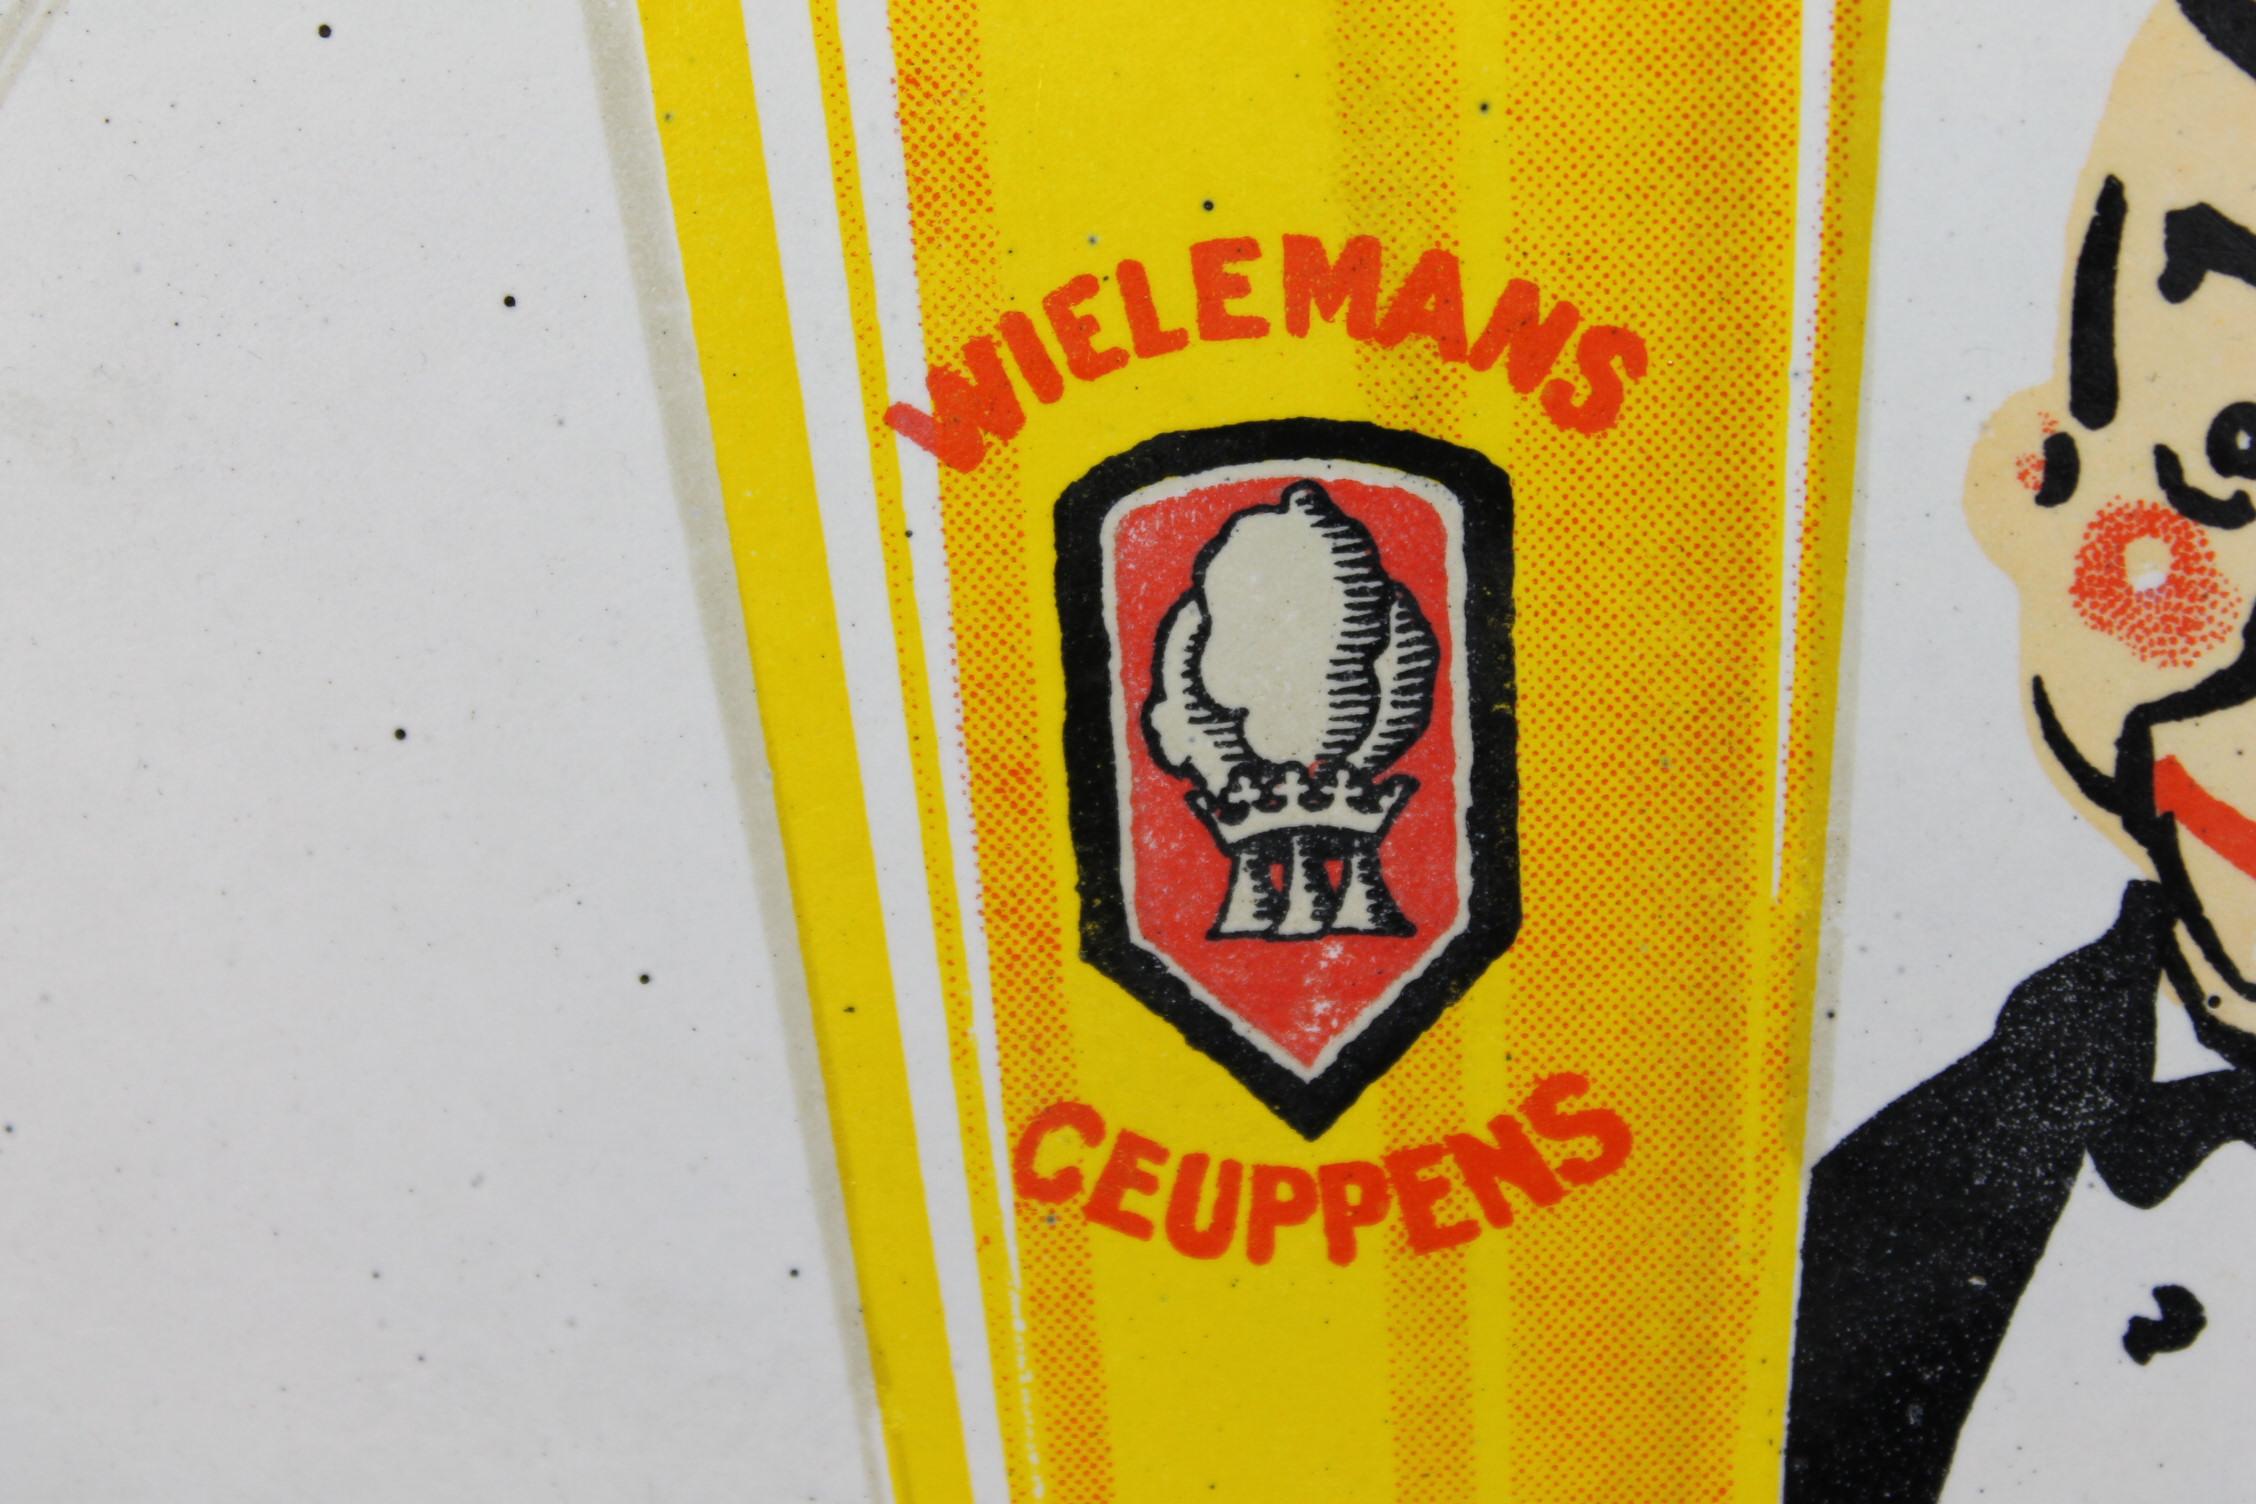 20th Century Porcelain Beer Tray for Belgian Beer, Brewery Wielemans, Ceuppens, Brussels